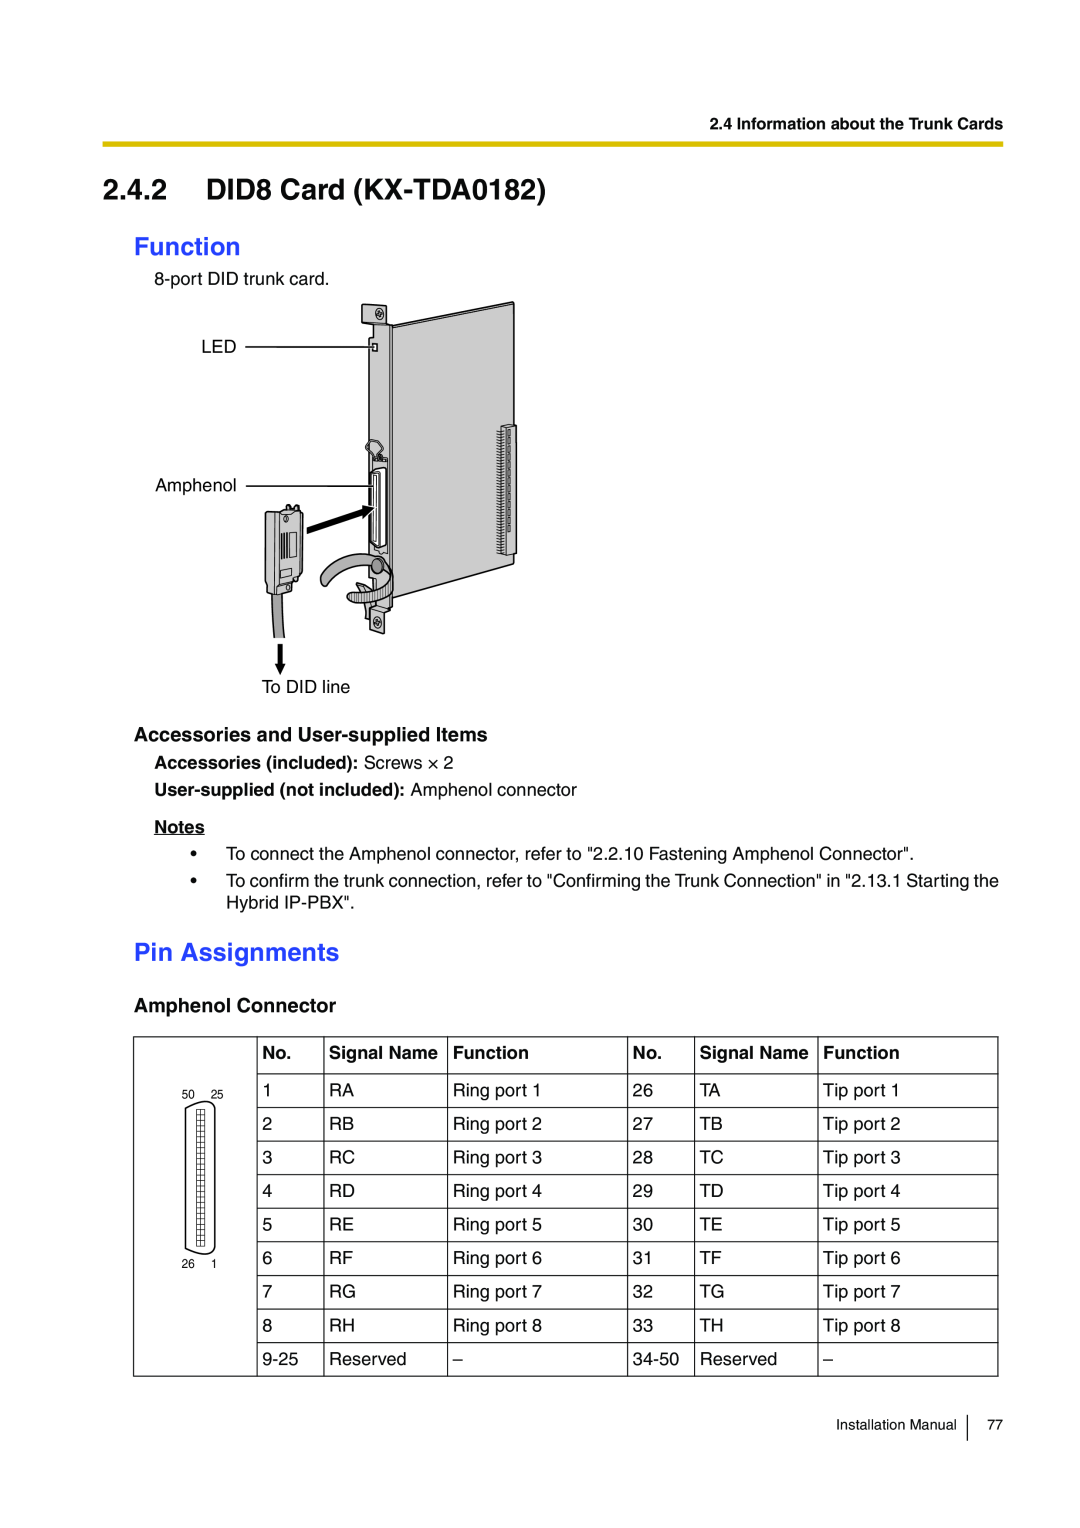 Panasonic KX-TDA100 2.4.2 DID8 Card KX-TDA0182, Function, Pin Assignments, Accessories and User-supplied Items 